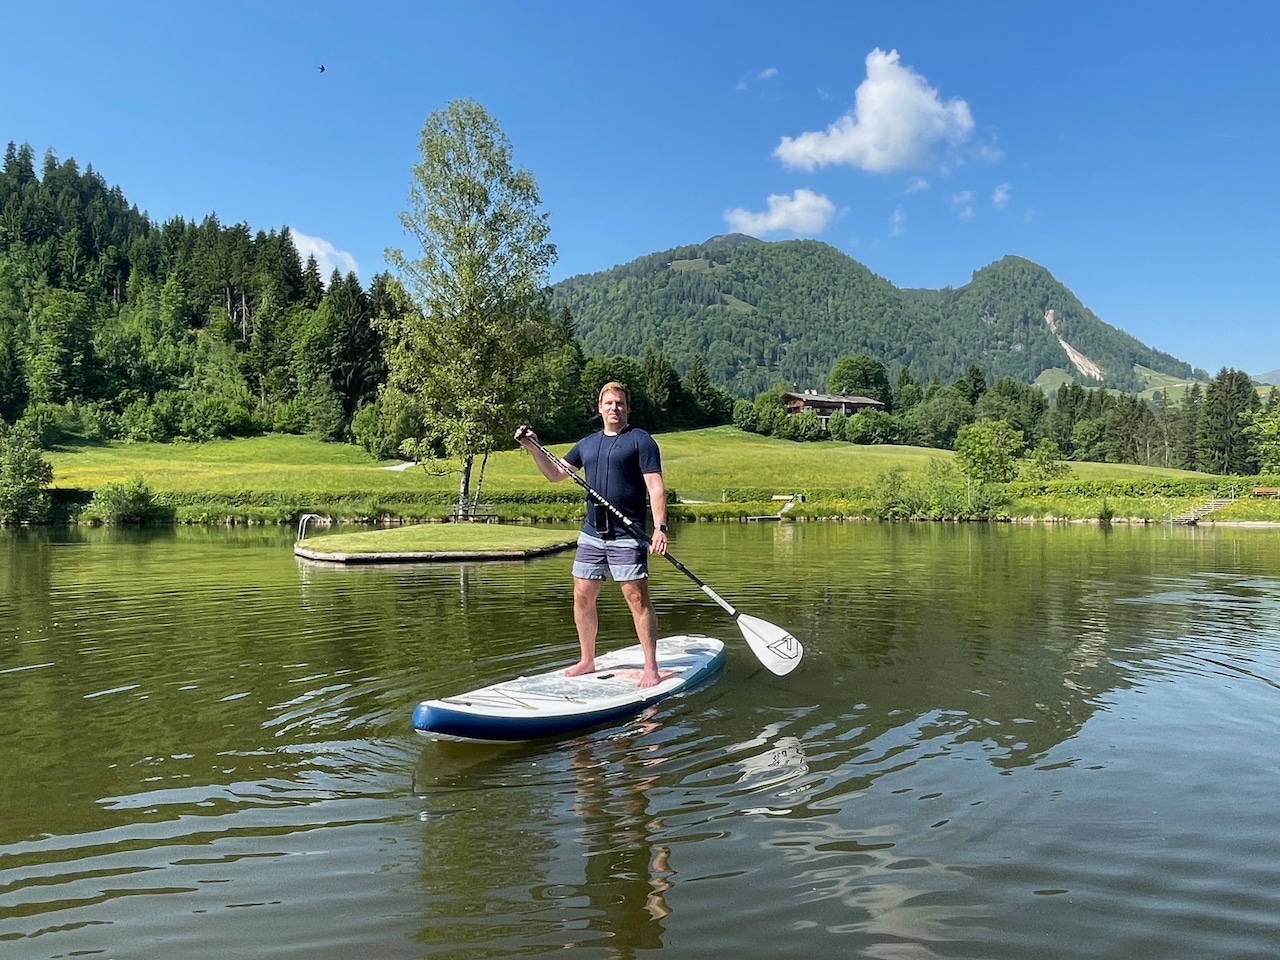 There's so much you can do in Pillerseetal - you won't get bored. In the picture: The Lauchsee. Our daily visit was one of the obligatory activities of our vacation because it is simply too beautiful there. Photo: Sascha Tegtmeyer